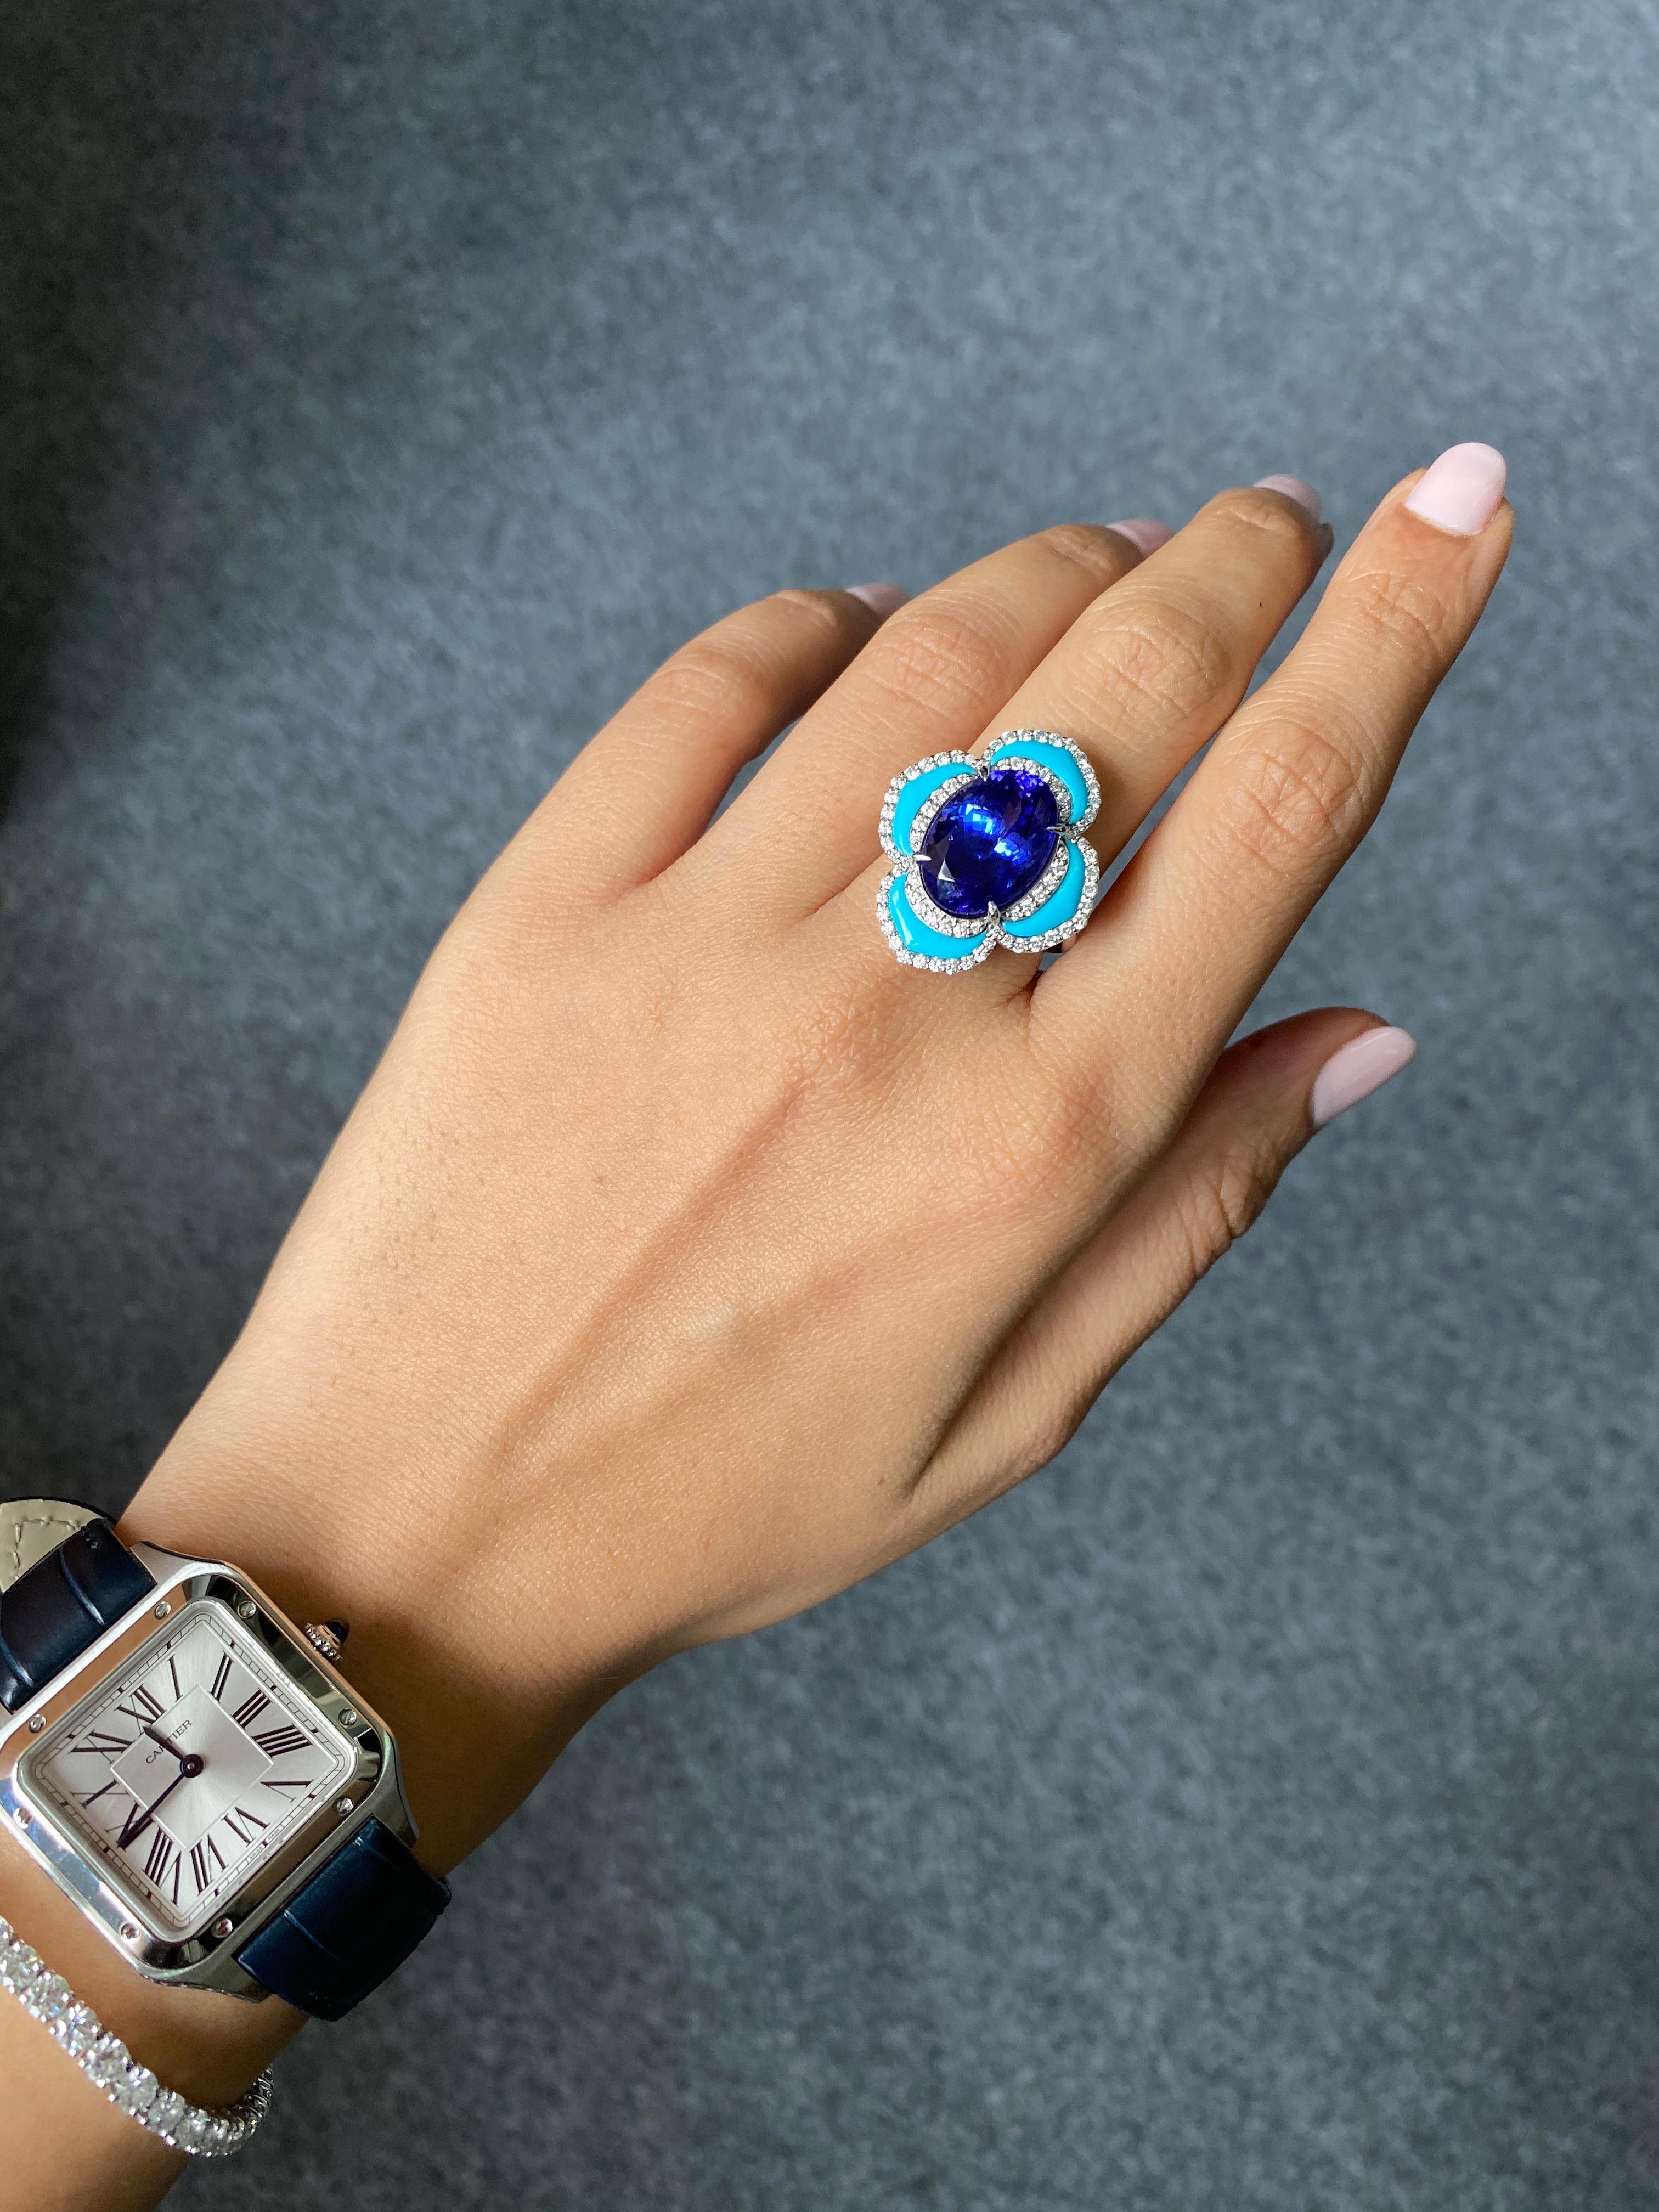 A very unique, one of a kind 8.16 carat Tanzanite, Turquoise and 0.7 carat VS quality White Diamond cocktail ring. The tanzanite is completely transparent, with no inclusions and great luster. 
Currently sized at US 7, can be altered. 
Free shipping